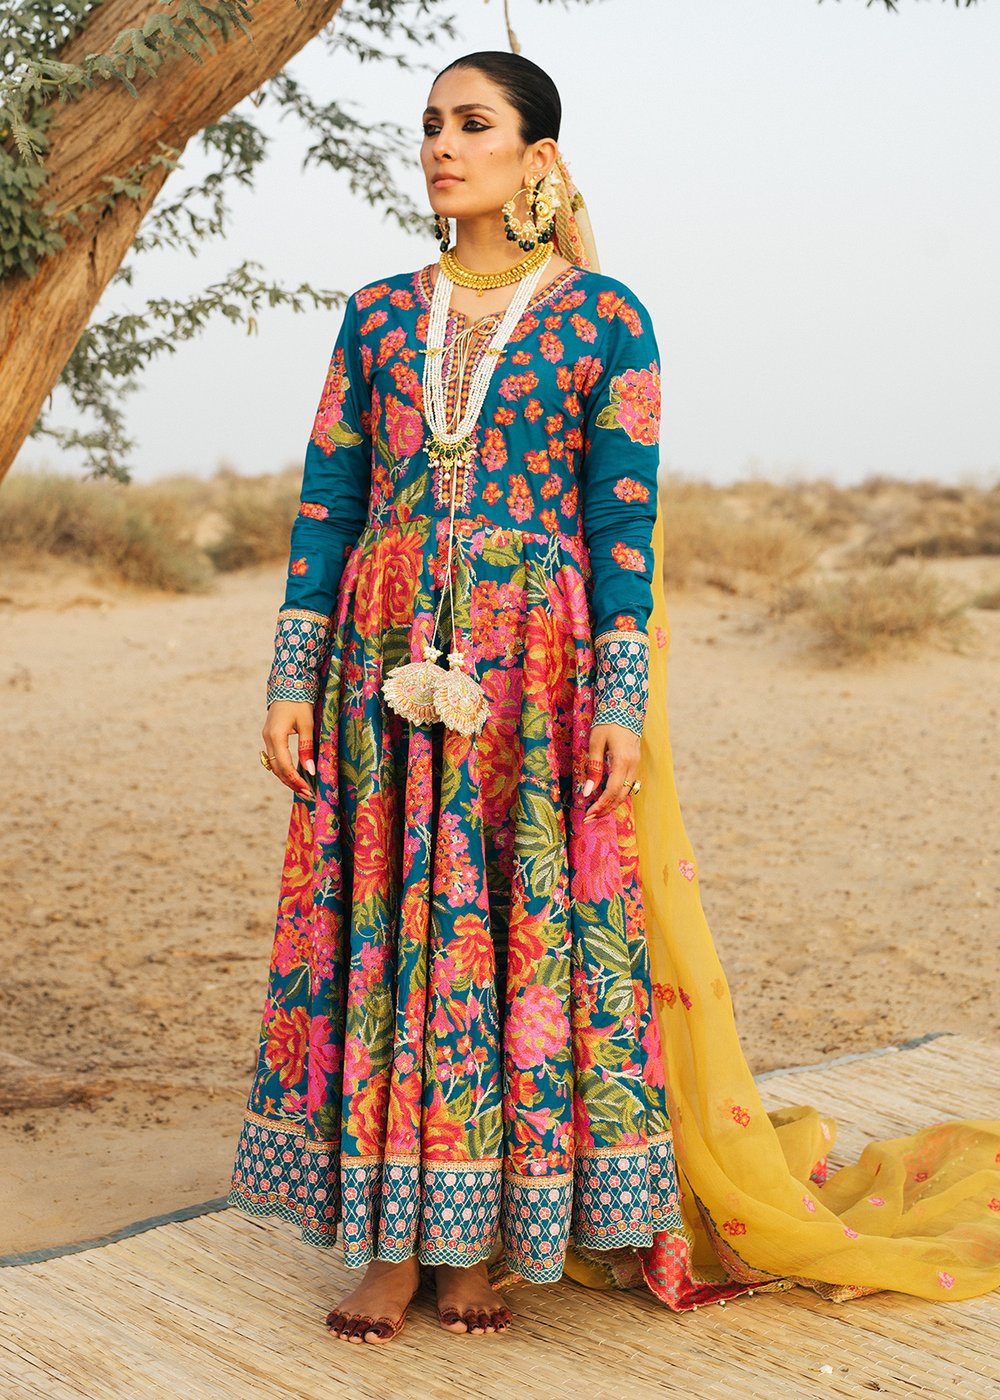 HUSSAIN REHAR | ROHI DE NAAL | Keyser (Teal Blue) Lawn dress is extremely trending for HUSAIN REHAR 2021 lawn. The PAKISTANI DRESSES IN UK are available for this wedding season. Get the exclusive customized Maria B, Asim Jofa, PAKISTANI DRESSES ONLINE from our PAKISTANI BOUTIQUE in UK, USA, Austria from Lebaasonline 